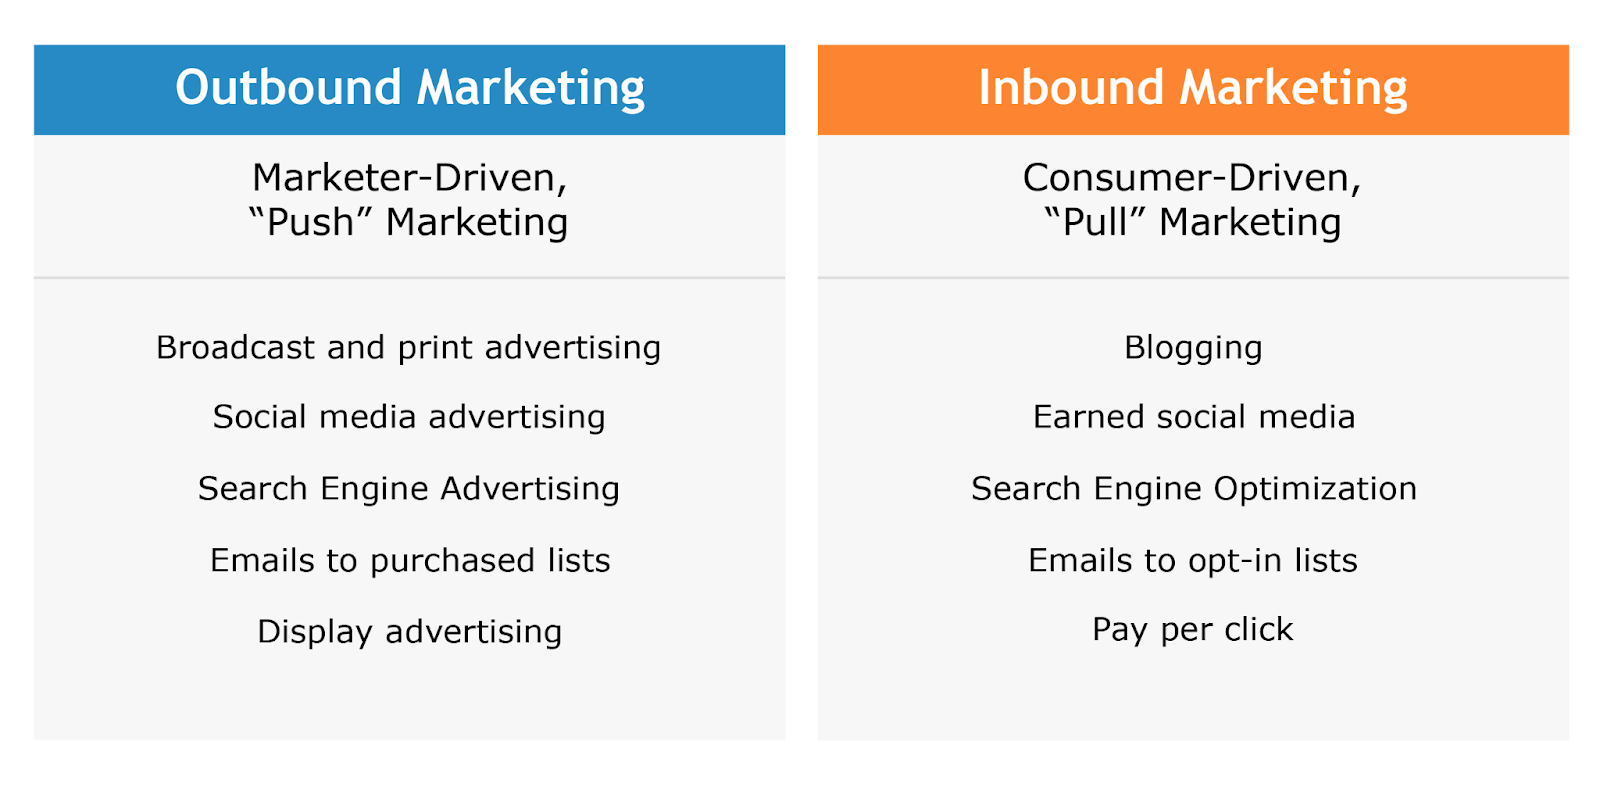 The different types of inbound marketing includes; SEO, earned social media and blogging. While outbound includes; print, display, and social media advertising.